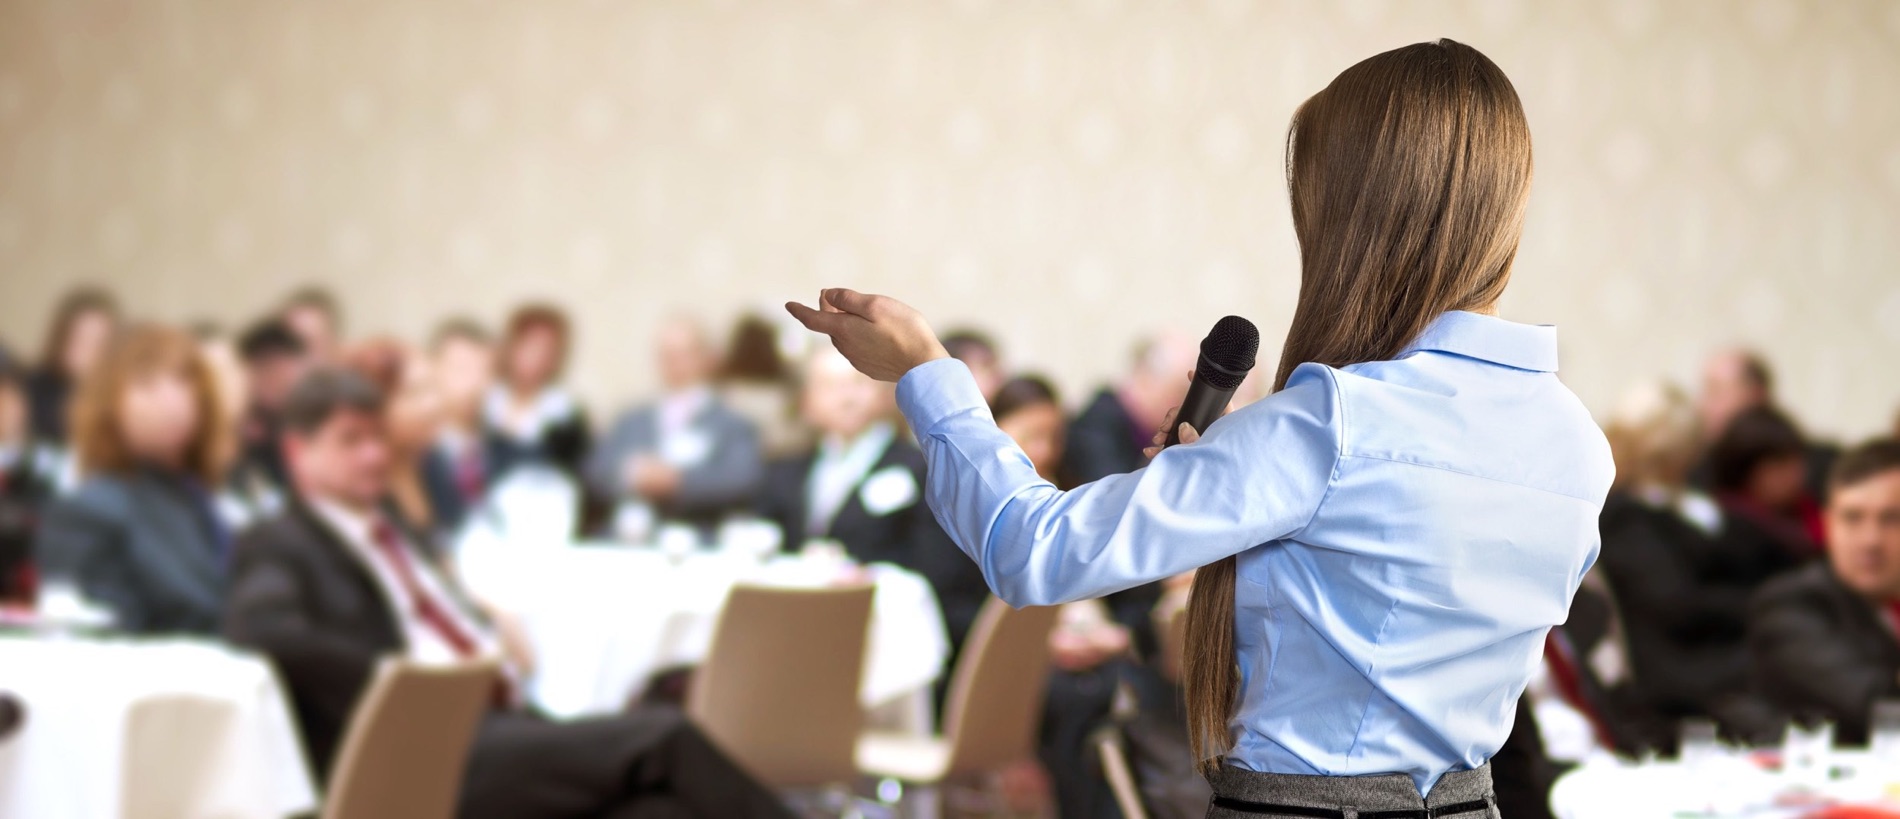 How to Facilitate Speakers and Conference Presentations